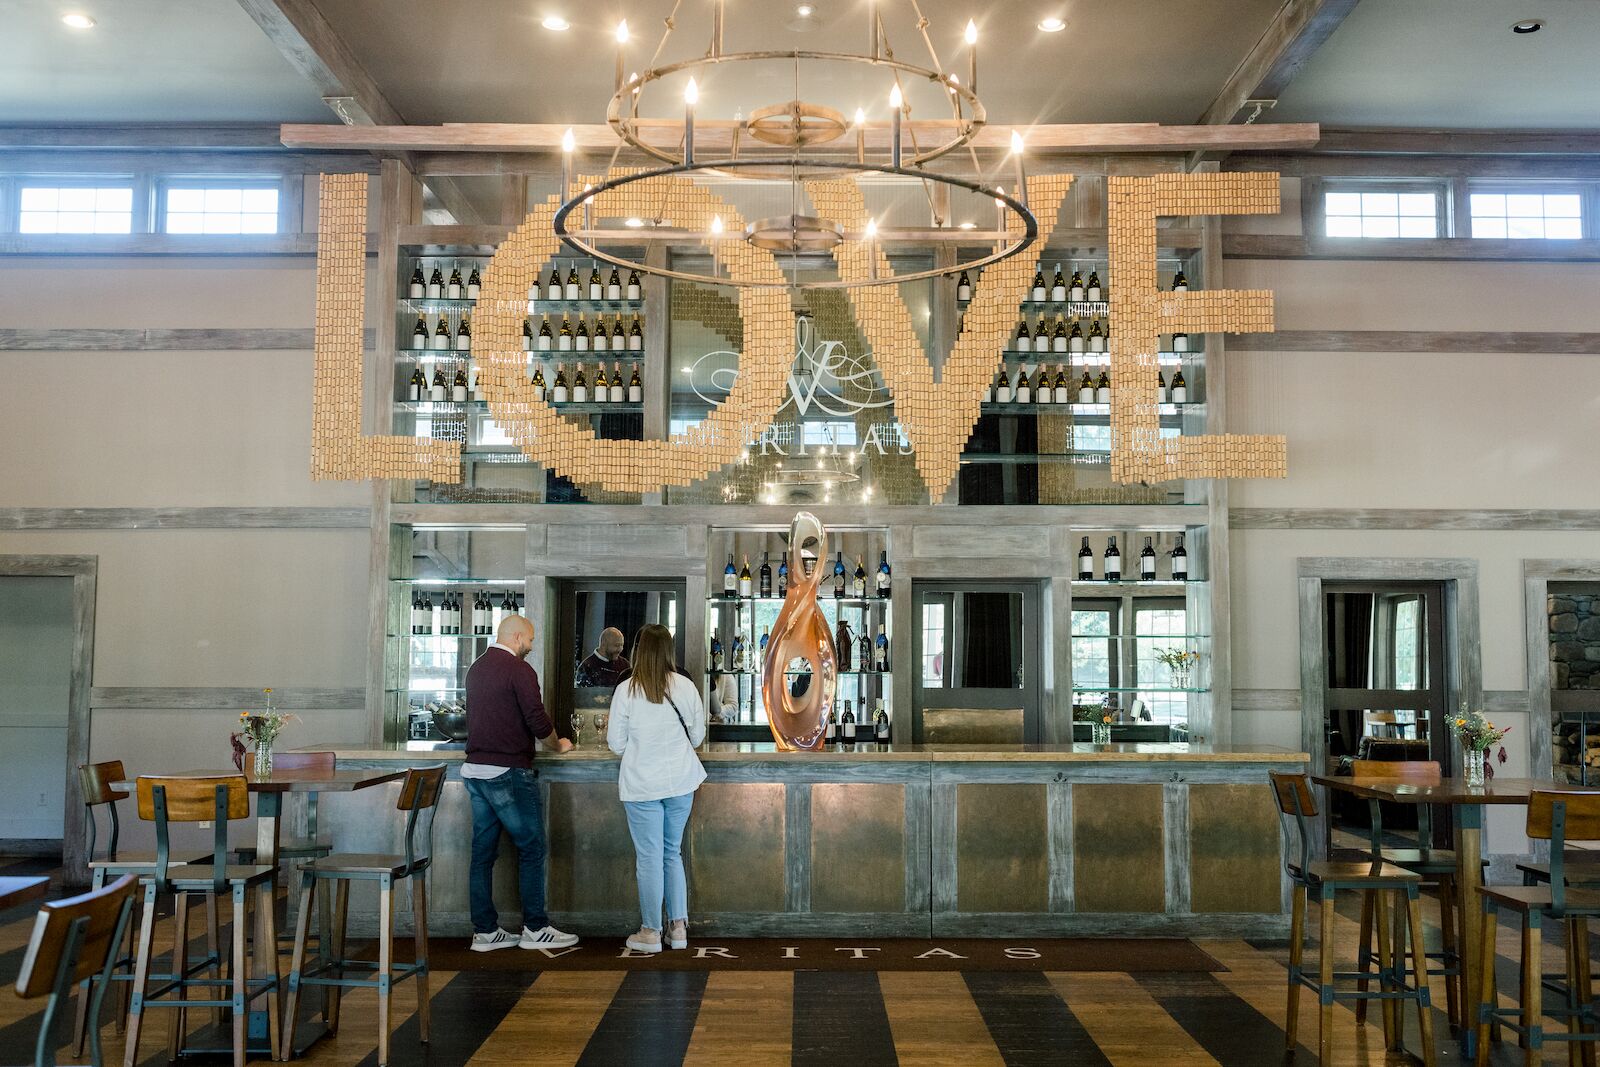 Large Love sign hanging from the ceiling inside the tasting room at Veritas Winery on Nelson 151